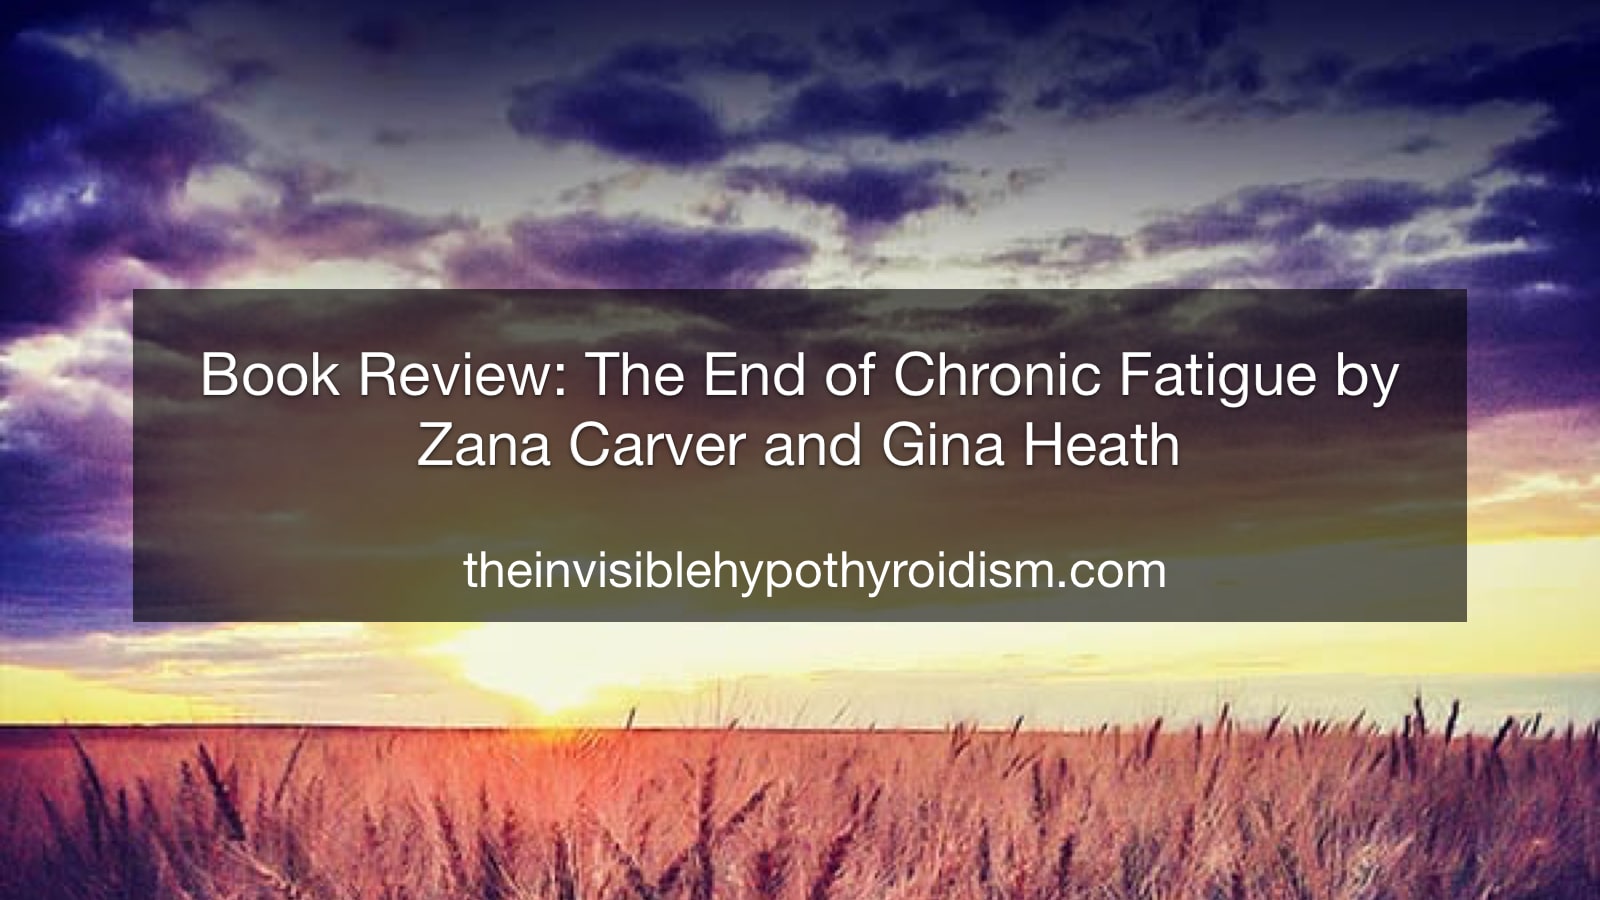 Book Review: The End of Chronic Fatigue by Zana Carver and Gina Heath